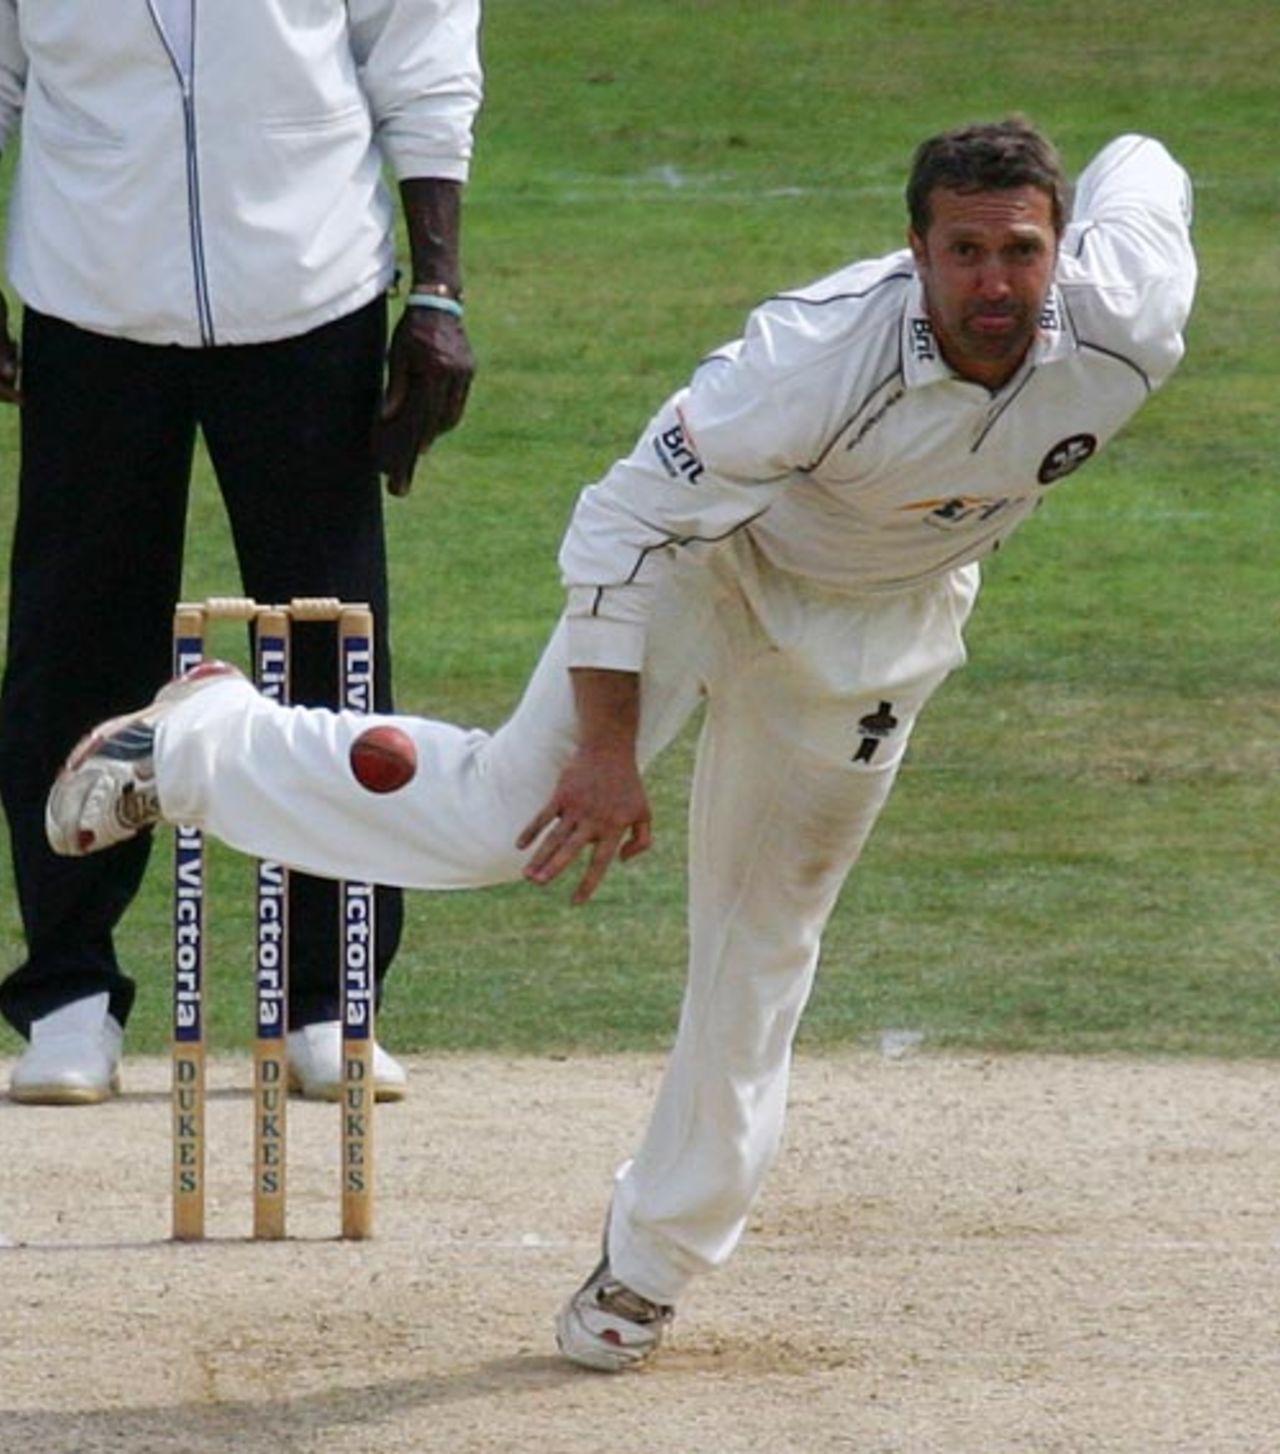 Ian Salisbury on his way to 3 for 82, Surrey v Northants, The Oval, August 2, 2006